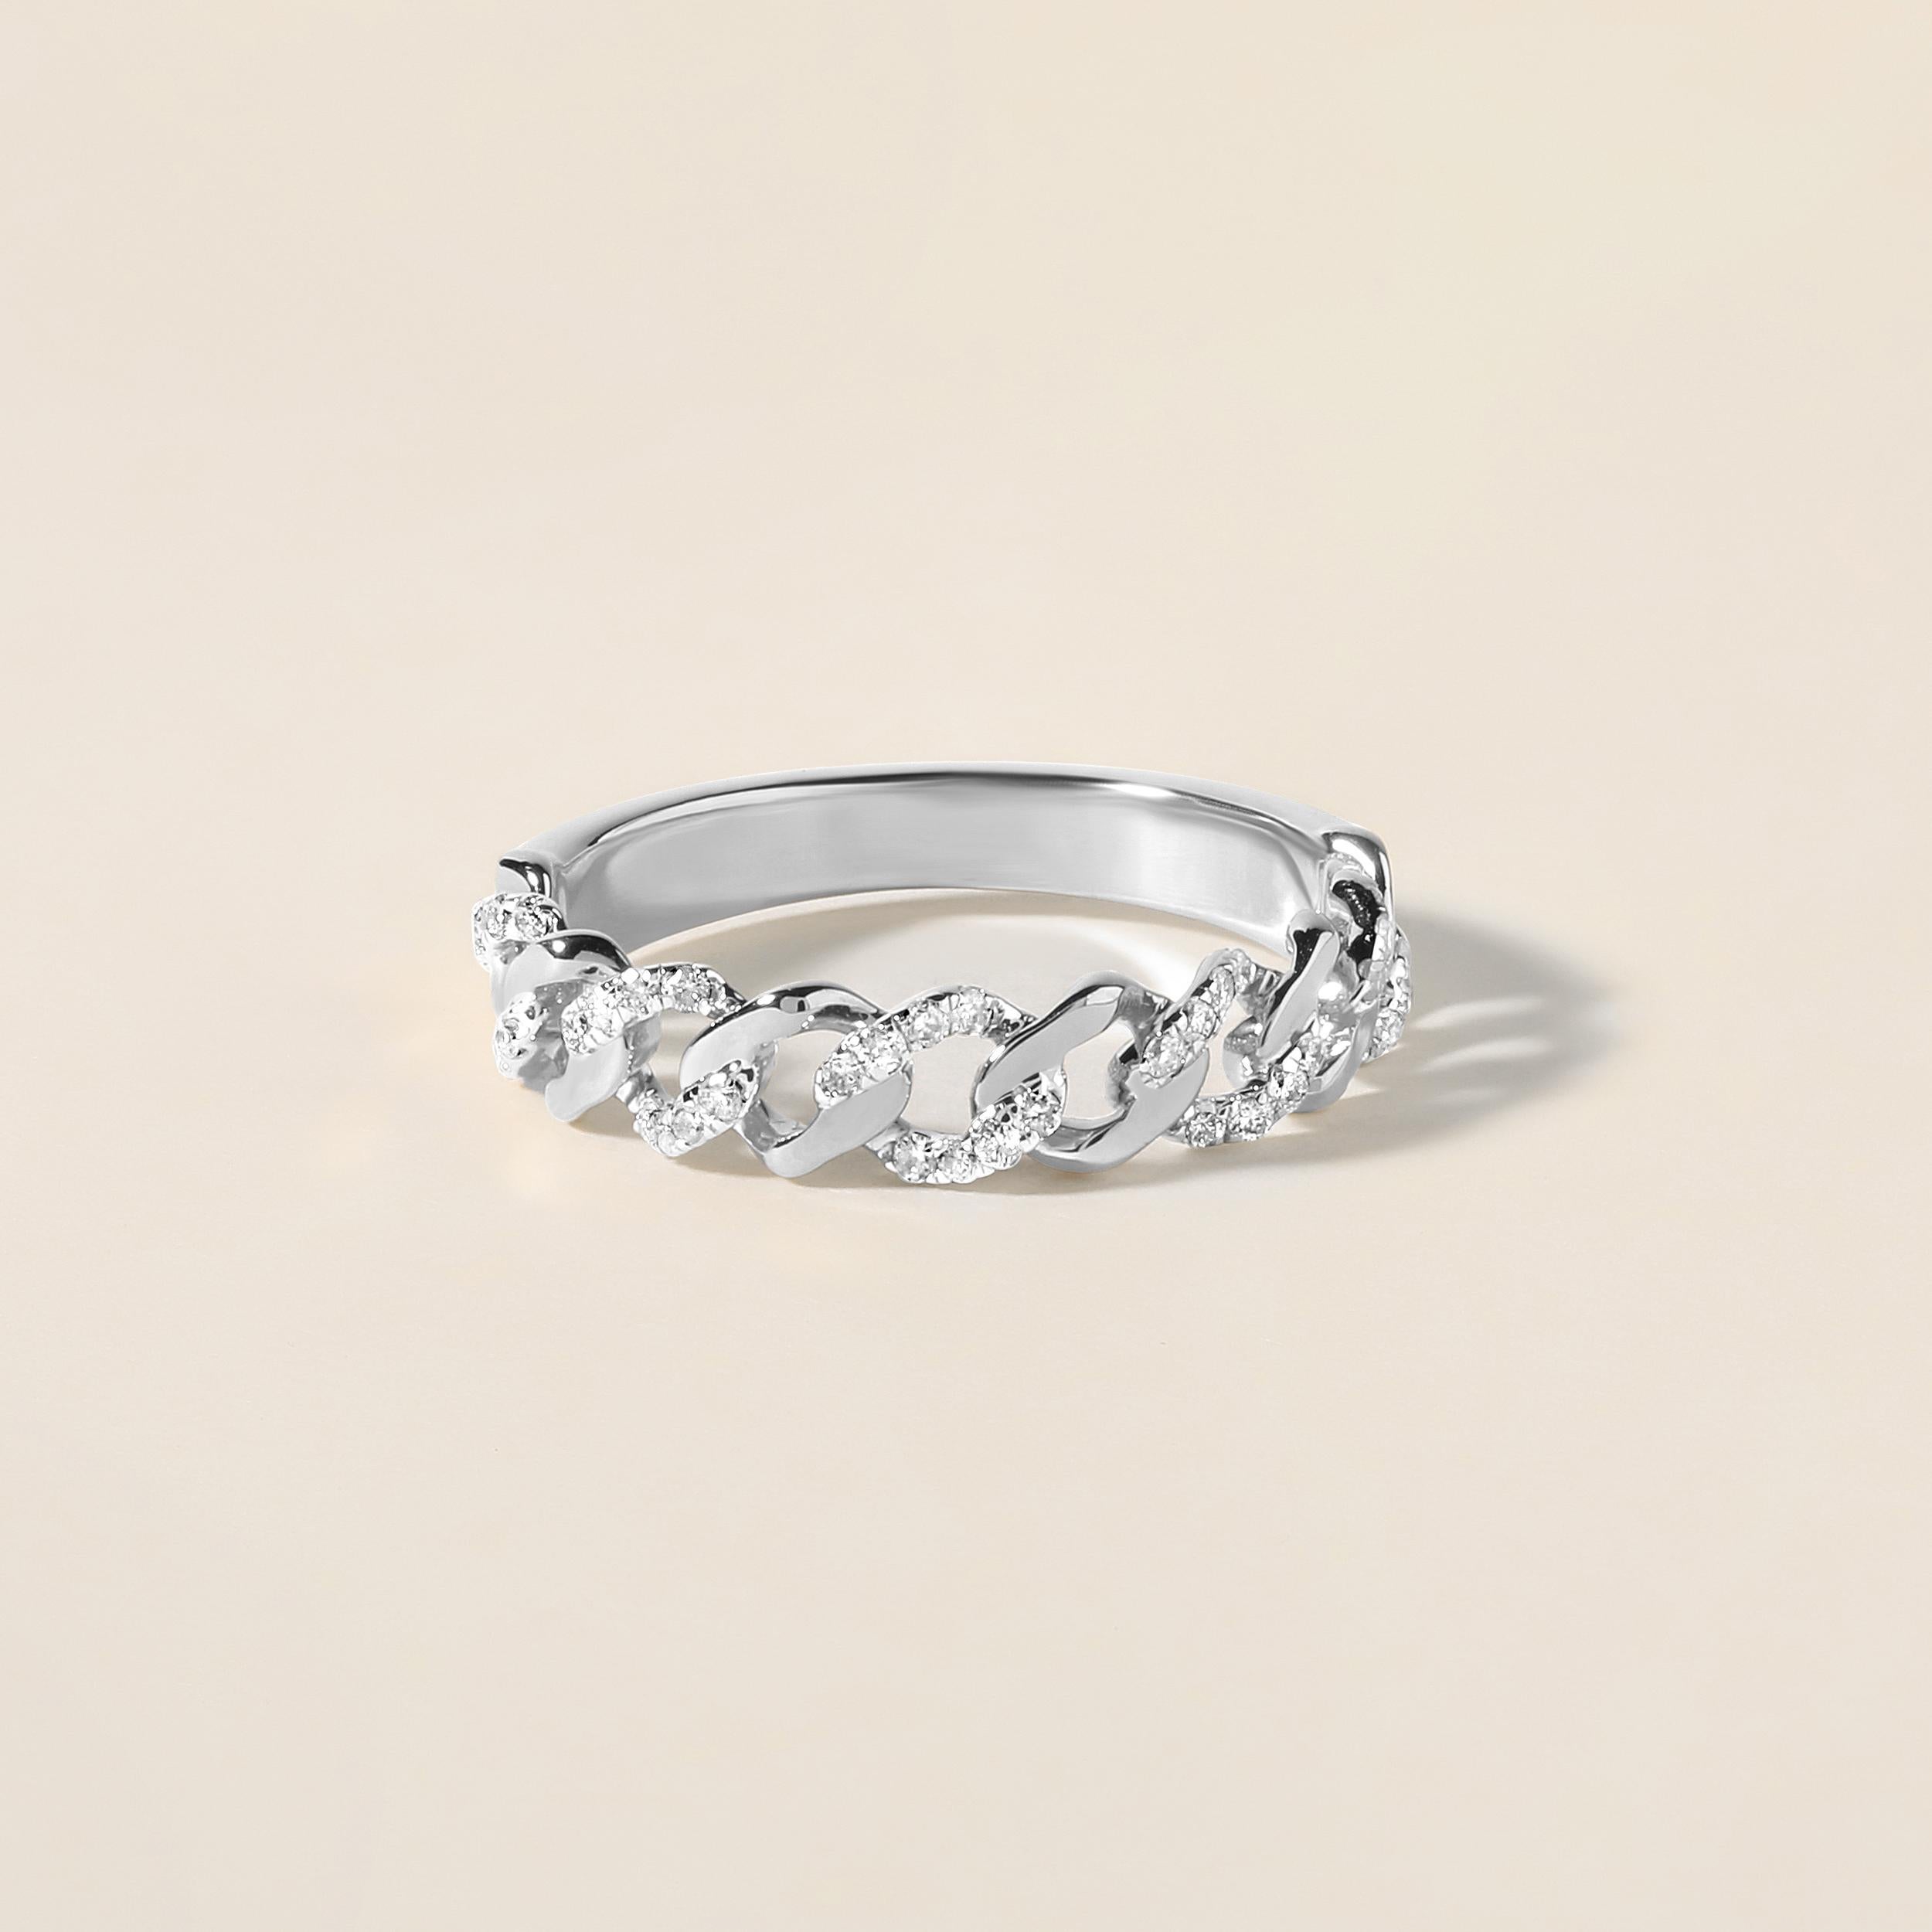 Ring Size: US 7

Crafted in 2.717 grams of 10K White Gold, the ring contains 40 stones of Round Natural Diamonds with a total of 0.214 carat in F-G color and I1-I2 clarity.

CONTEMPORARY AND TIMELESS ESSENCE: Crafted in 14-karat/18-karat with 100%